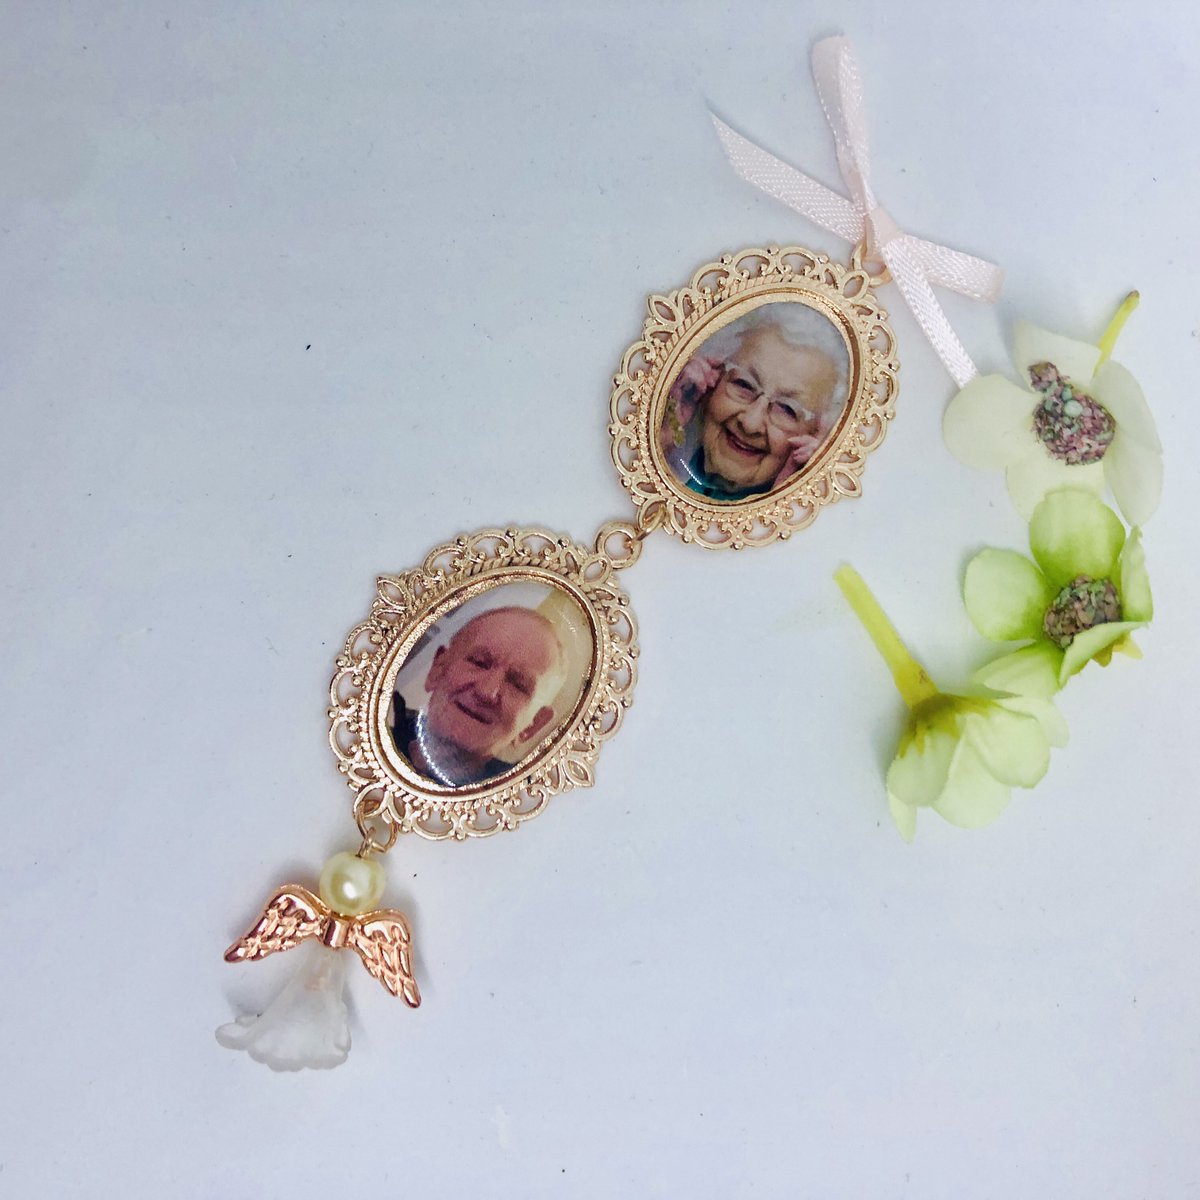 ELOISE ROSE ANGEL 2 - 2 Oval Bridal Memory Charms. This frame is edged with a filagree style pattern and has a beautiful Rose Gold Angel. #memorycharm #bouquetcharm #picturecharm #bridalcharm #rosegold #rosegoldwedding #bridalaccessories #bridalaccesories #weddingaccessories